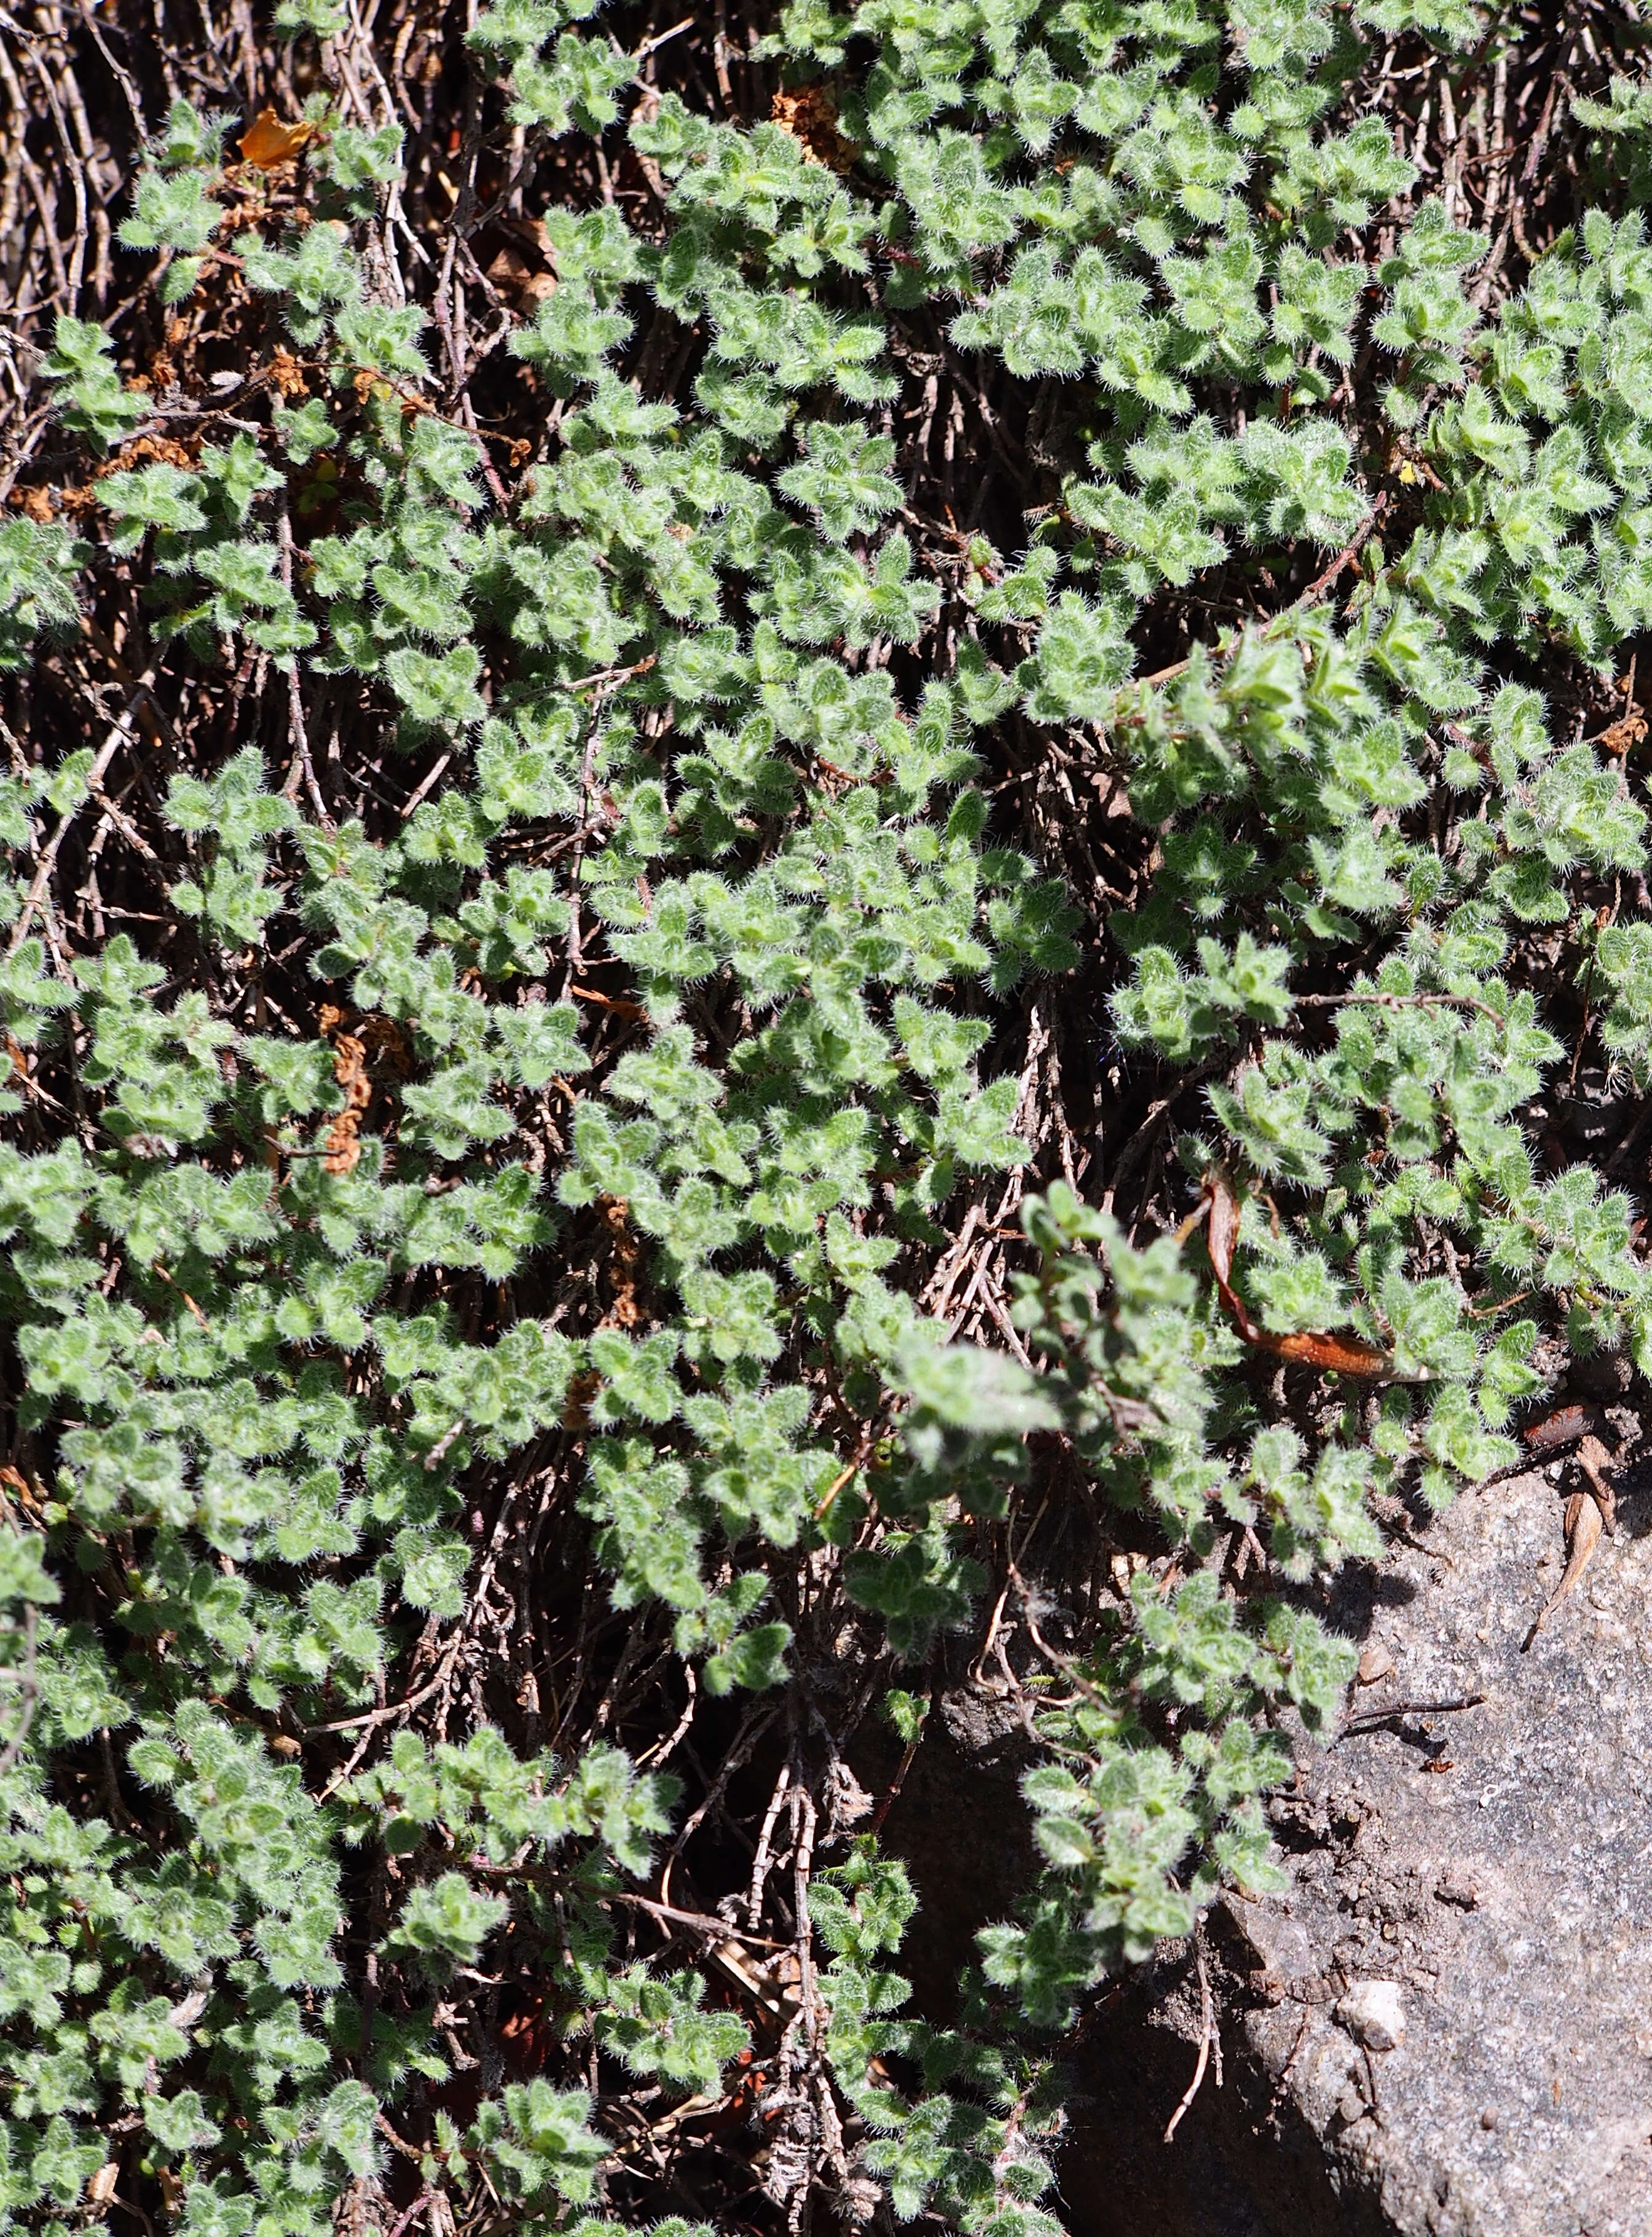 Image of creeping thyme